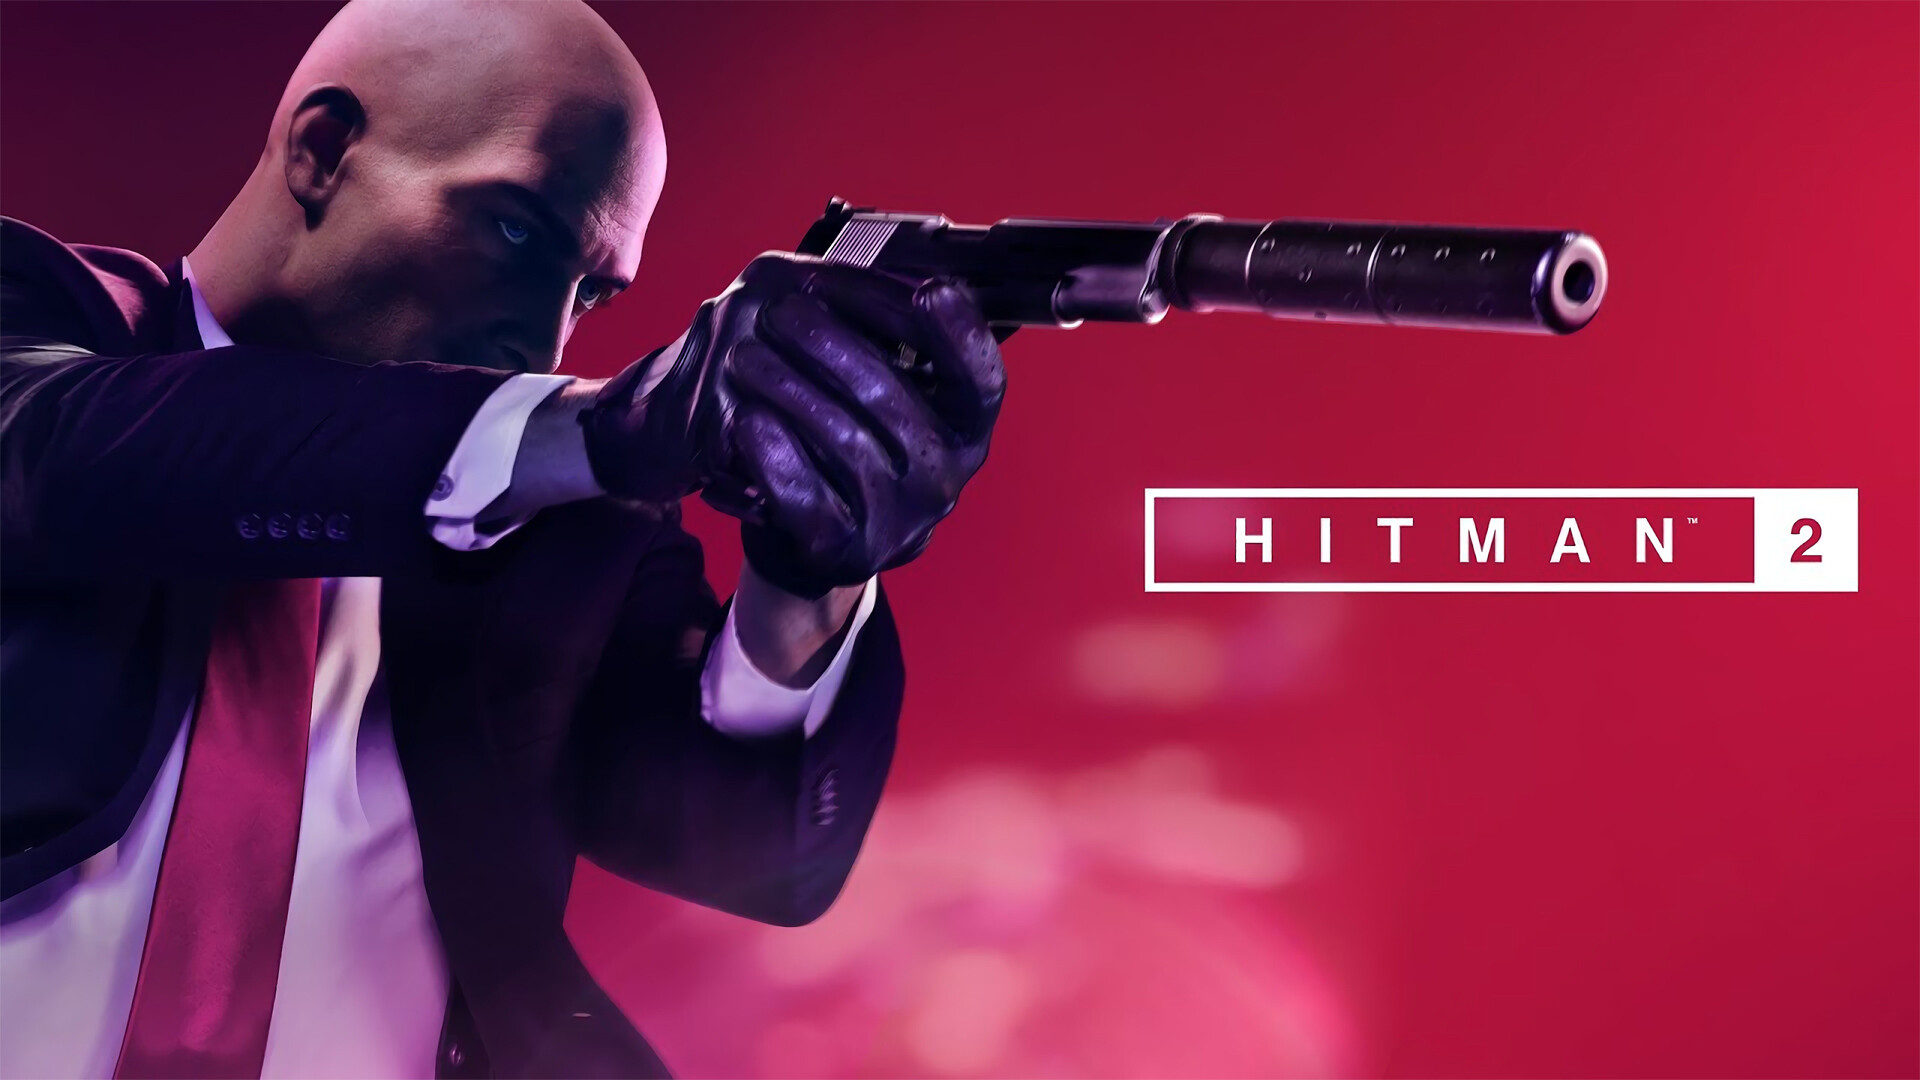 Hitman game, Gamepressure. com wallpapers, Collection of visuals, Gaming enthusiasts' choice, 1920x1080 Full HD Desktop